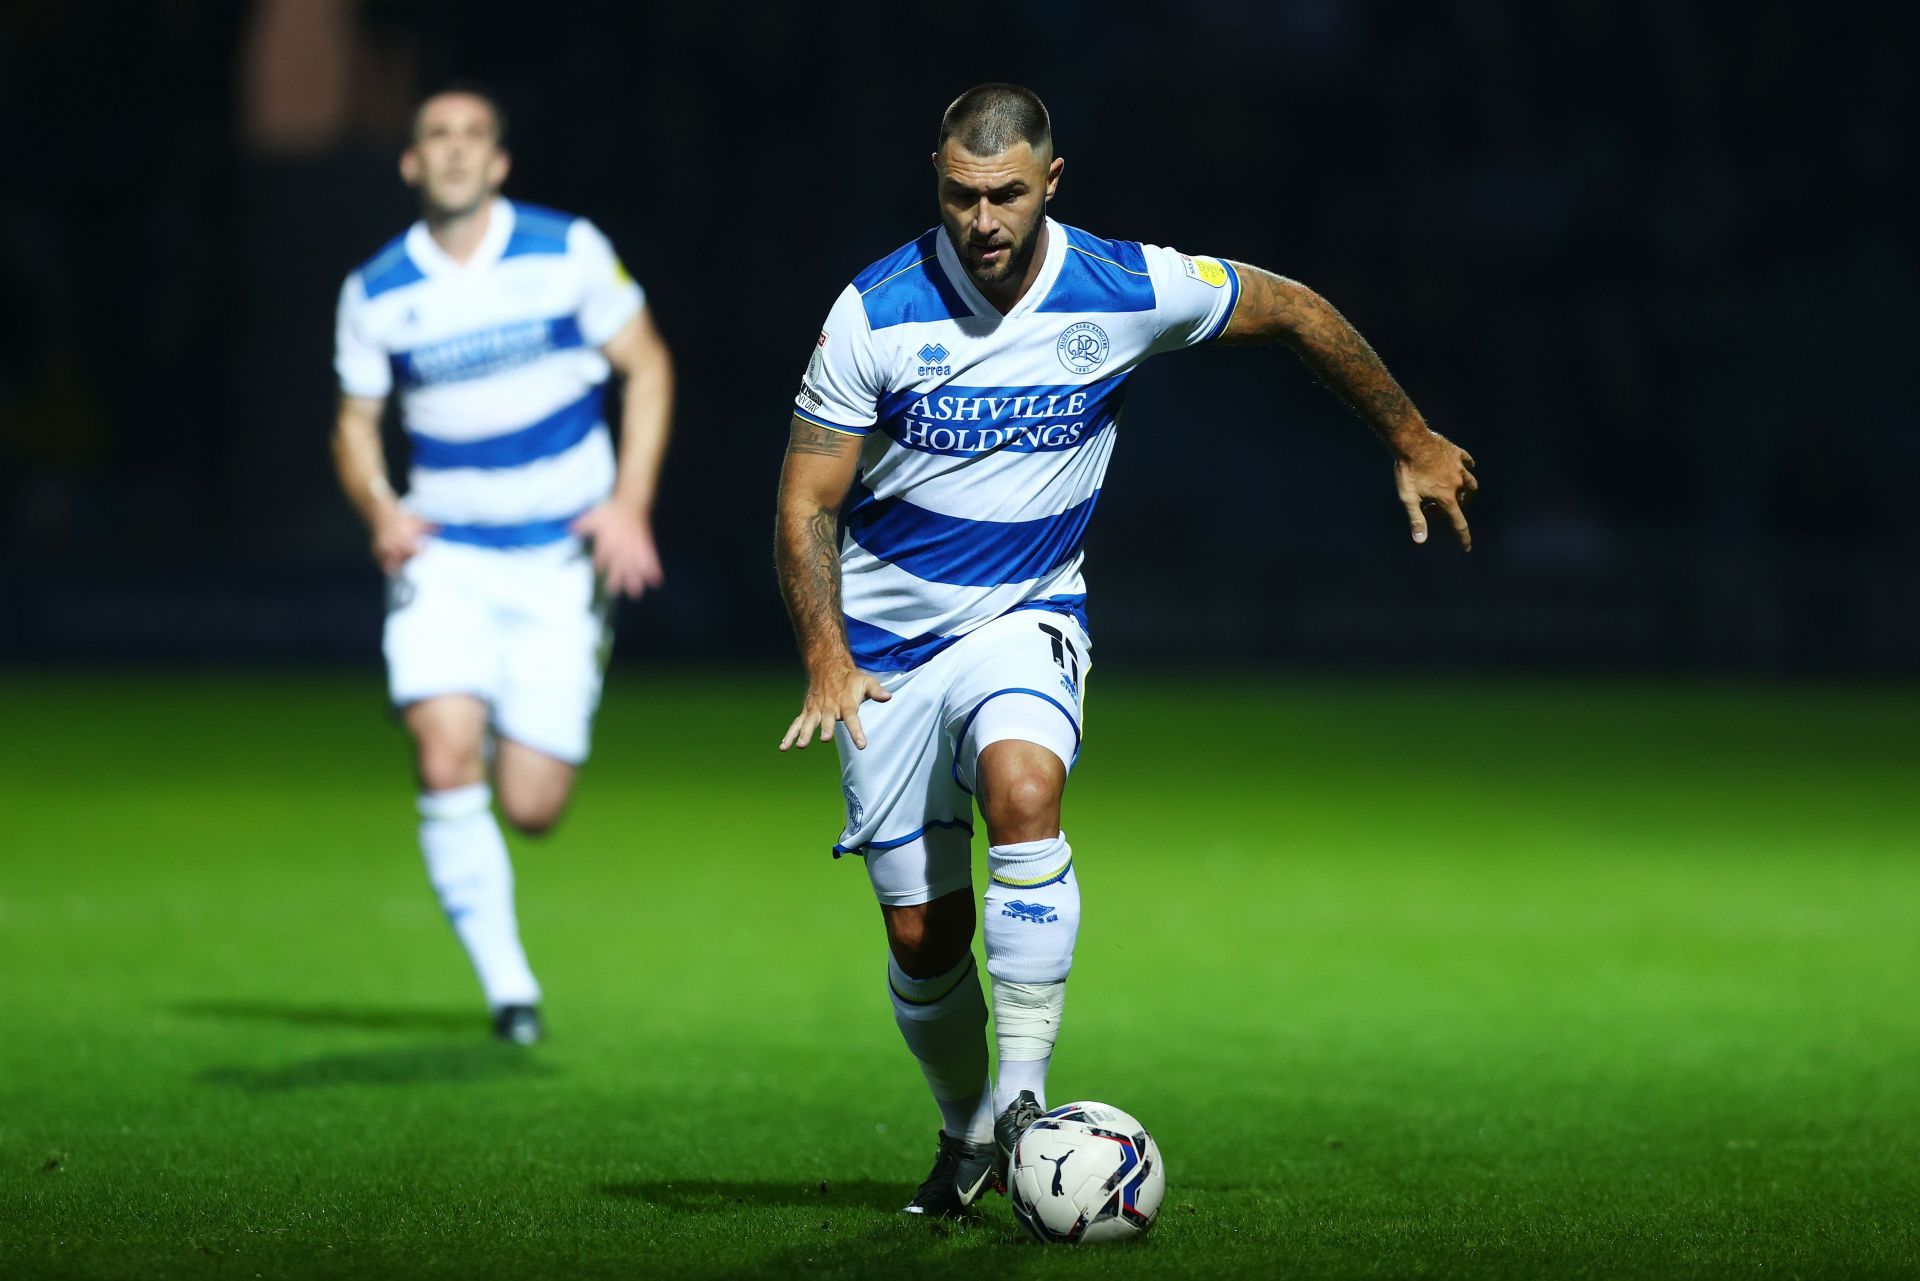 QPR will hope to continue their strong run of form